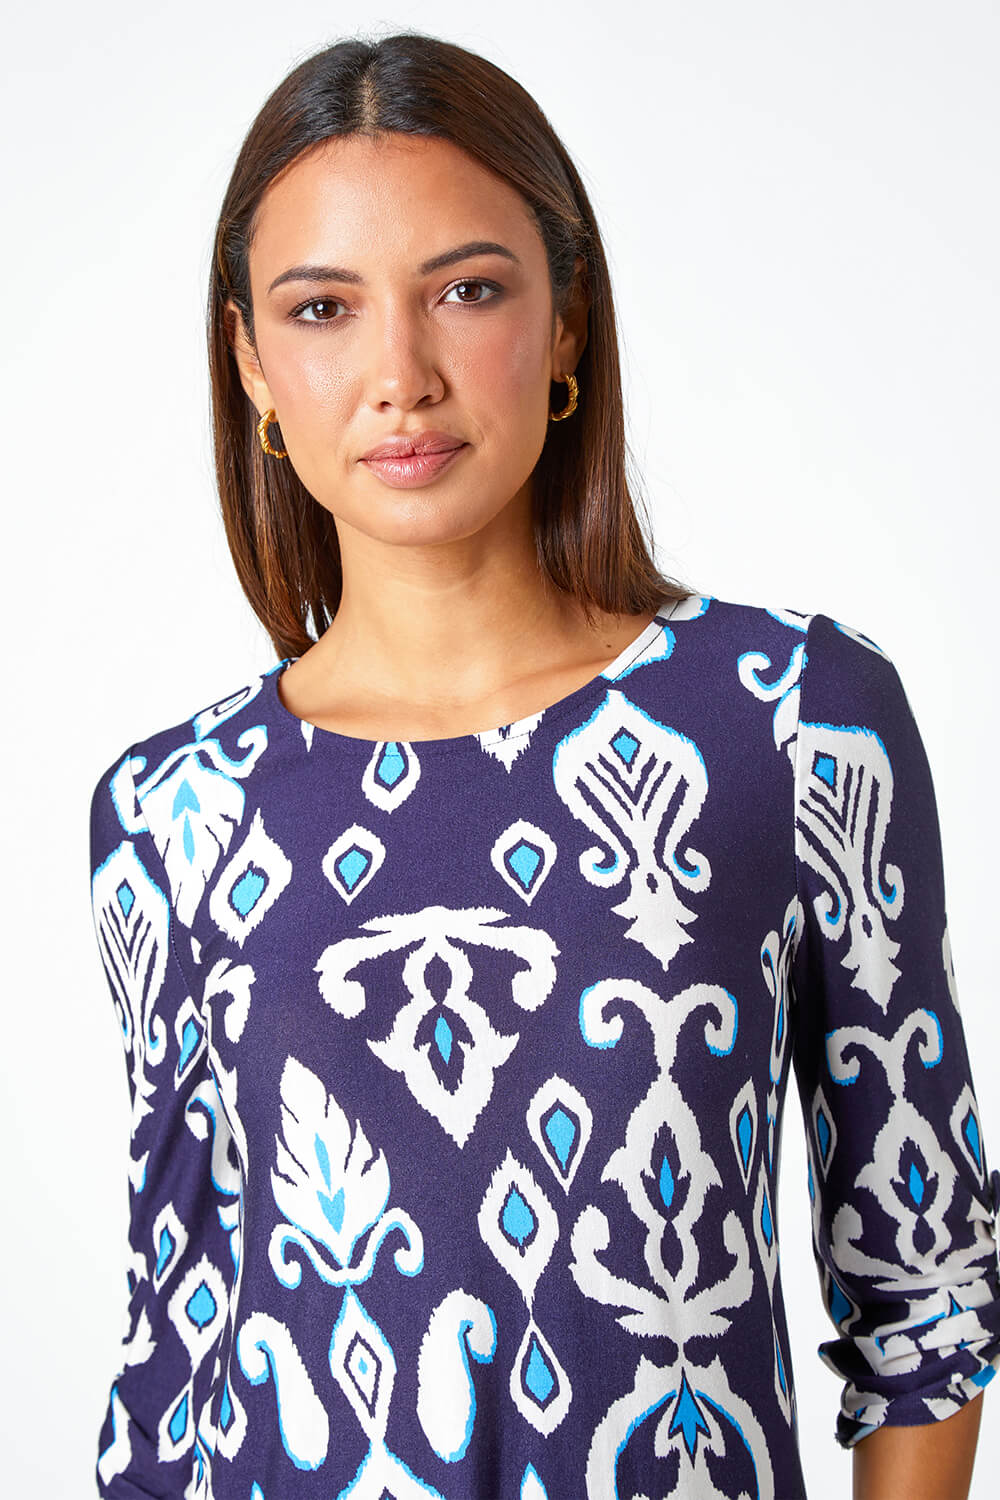 Blue Border Print Stretch Jersey Top, Image 4 of 5